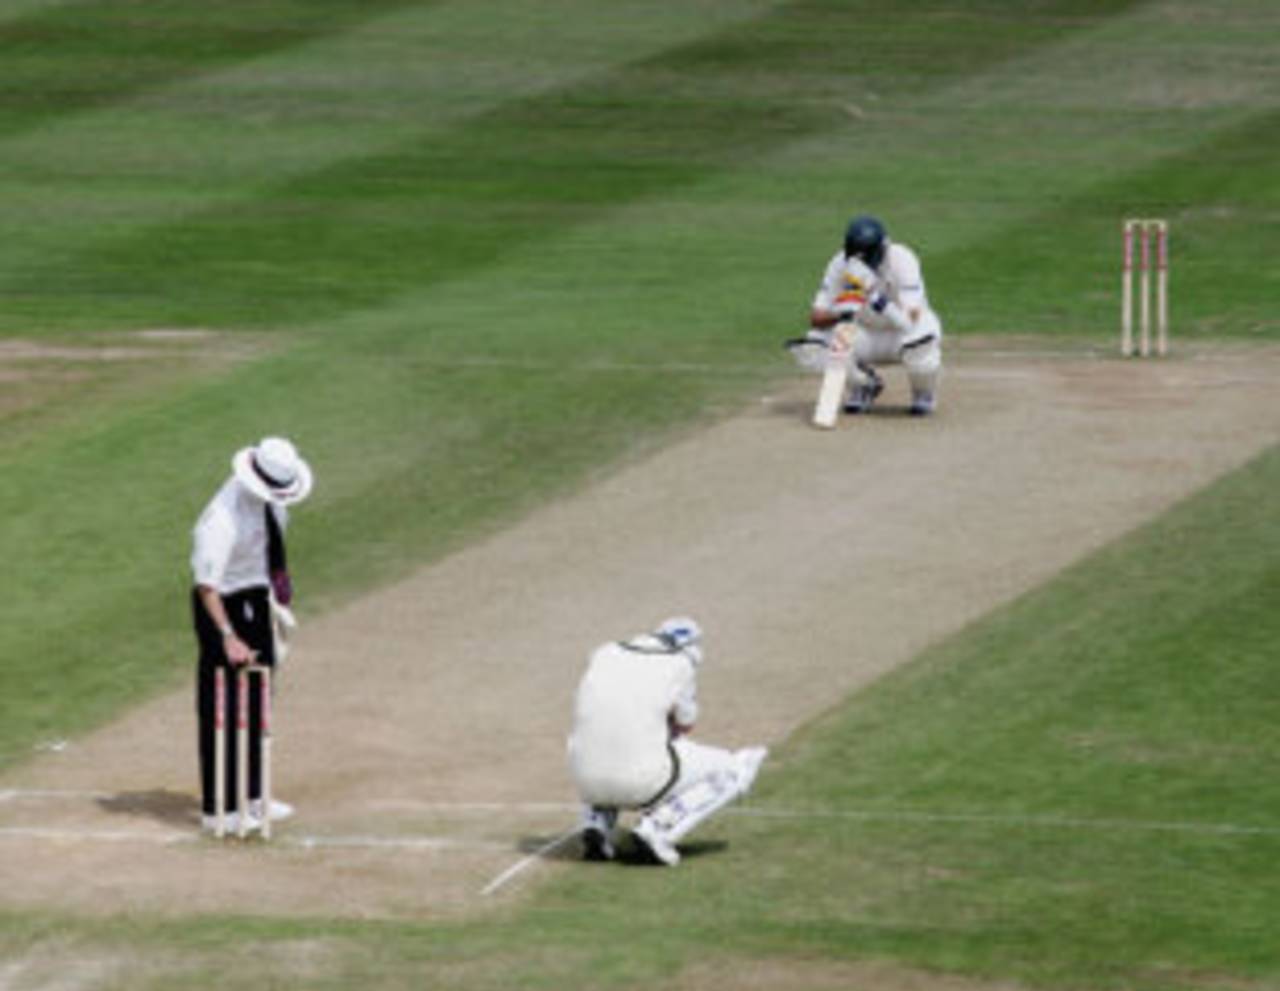 Heartbreak at Edgbaston in 2005: the DRS has put paid to the spontaneous emotion of moments like this&nbsp;&nbsp;&bull;&nbsp;&nbsp;Getty Images